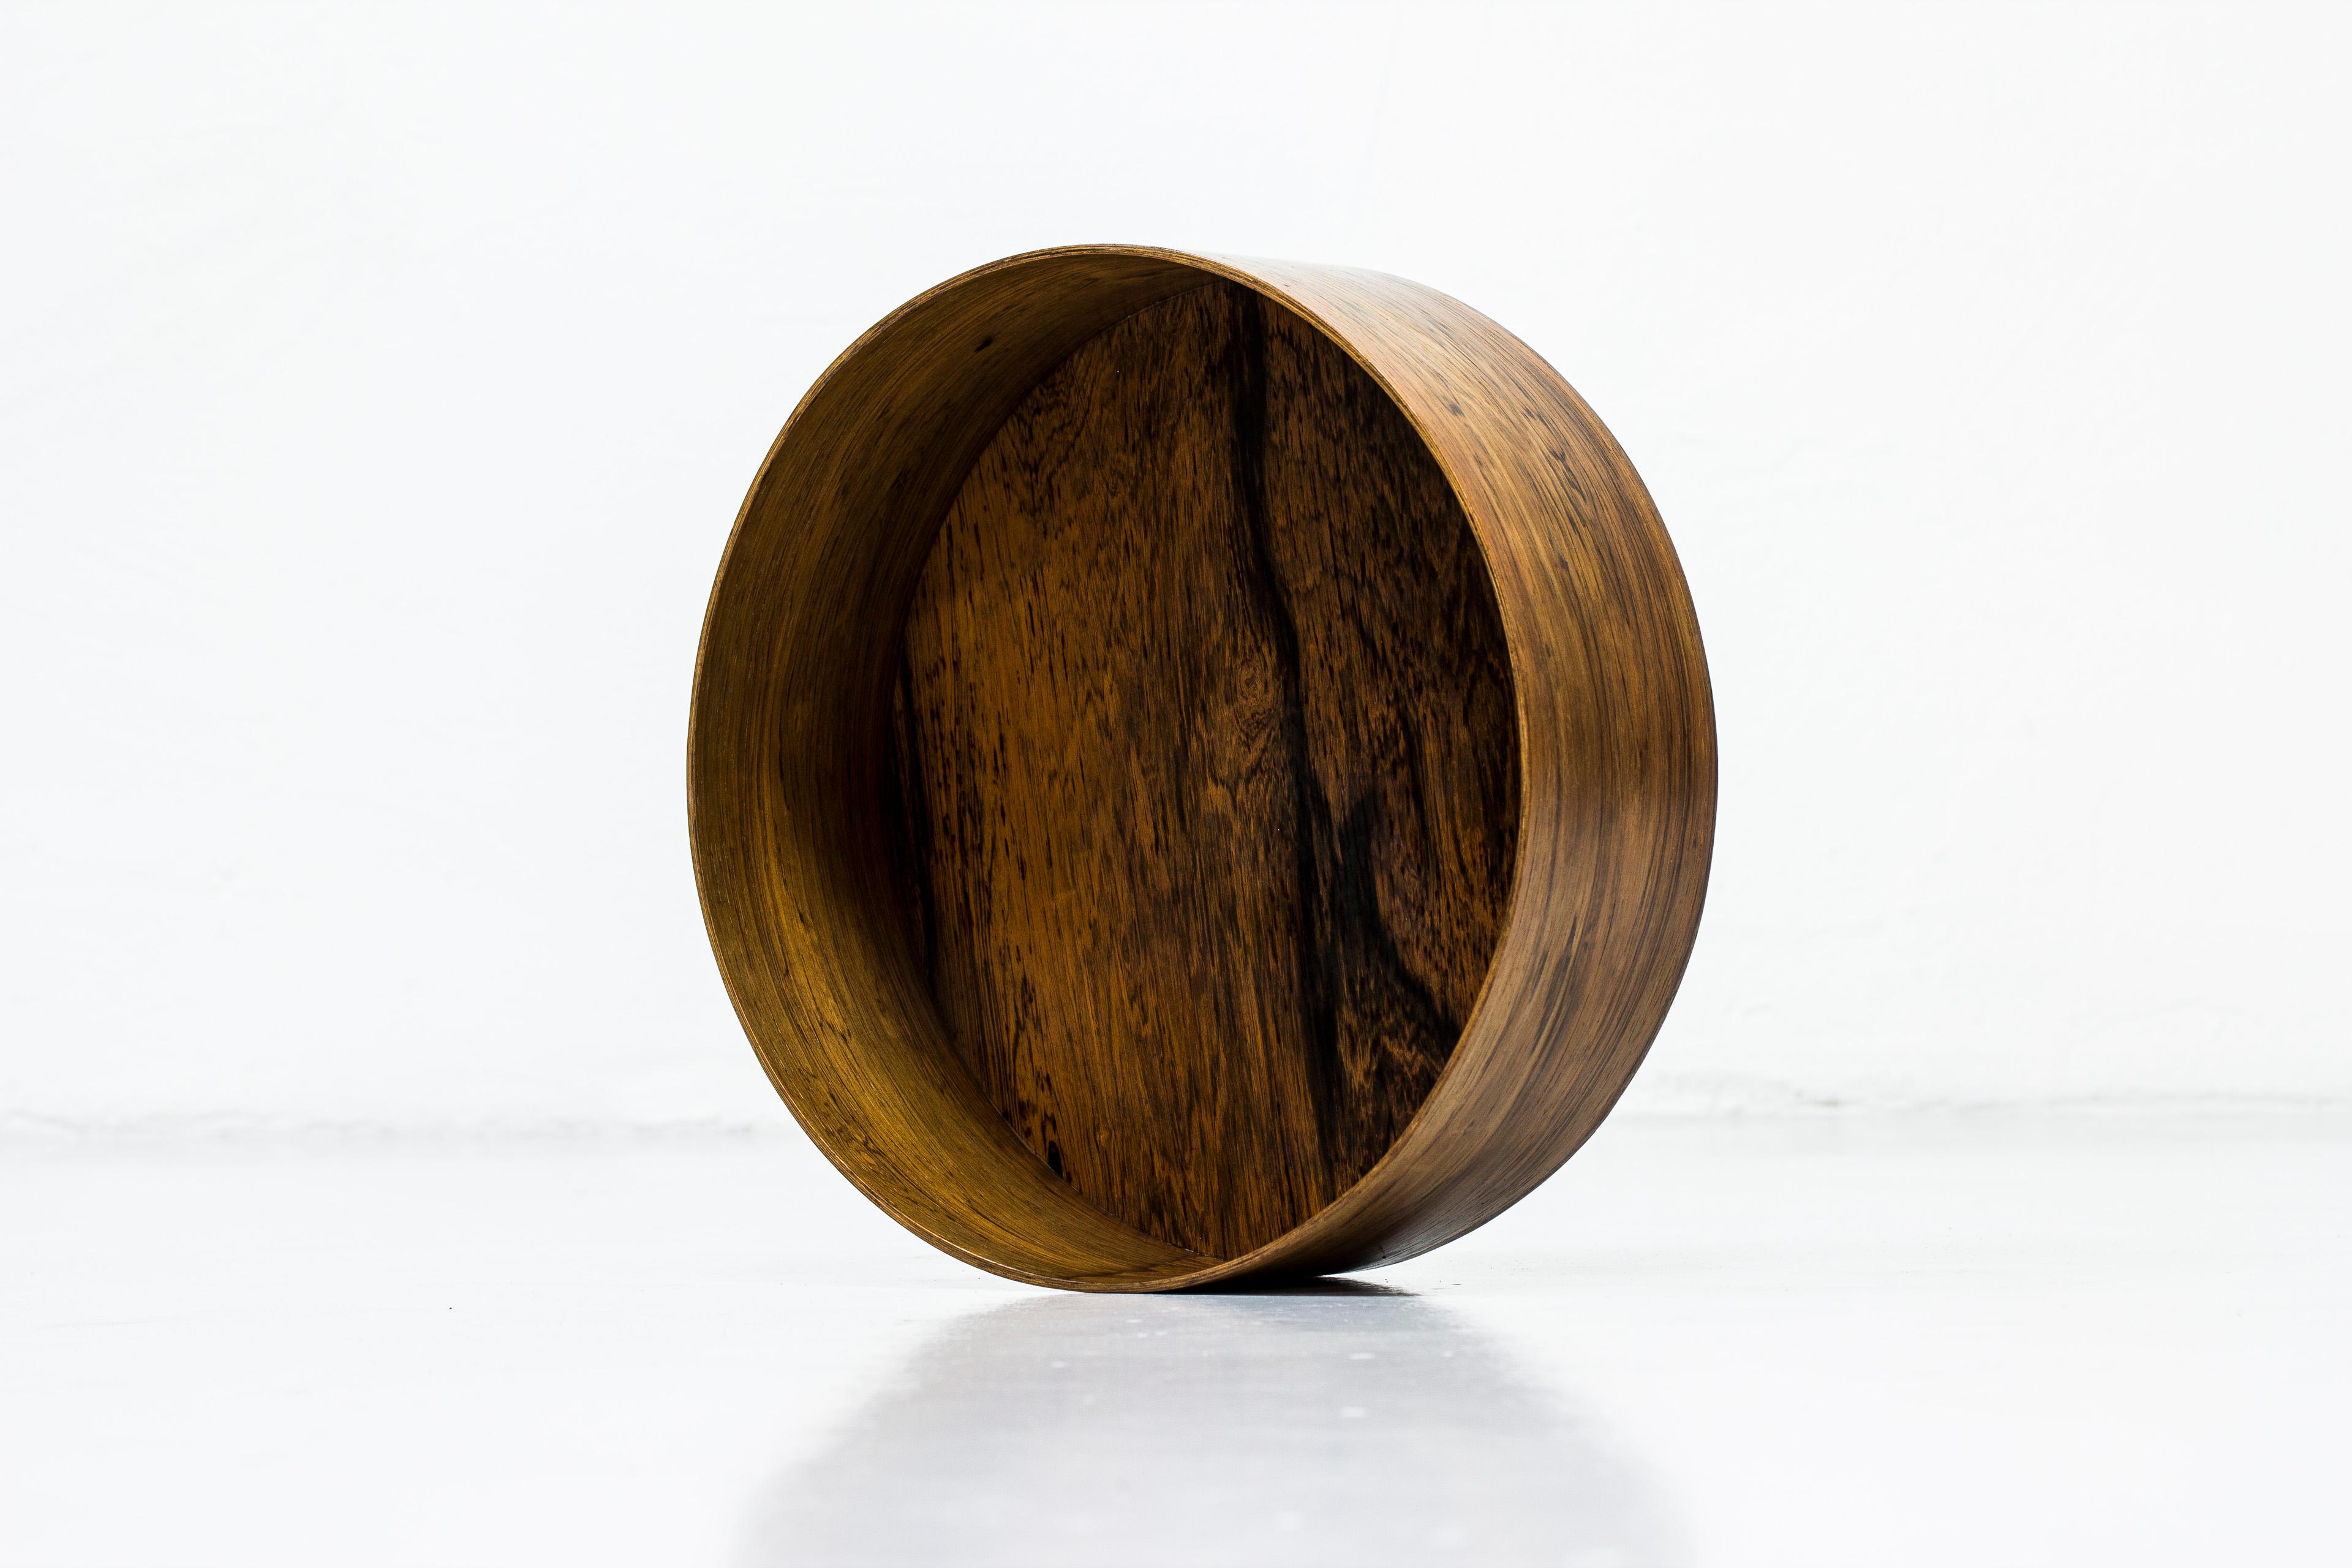 Swedish rosewood bowl designed by Torsten Johansson. Produced during the 1950s by his own company Formträ AB. Very good condition with light wear and patina. Rare large size.